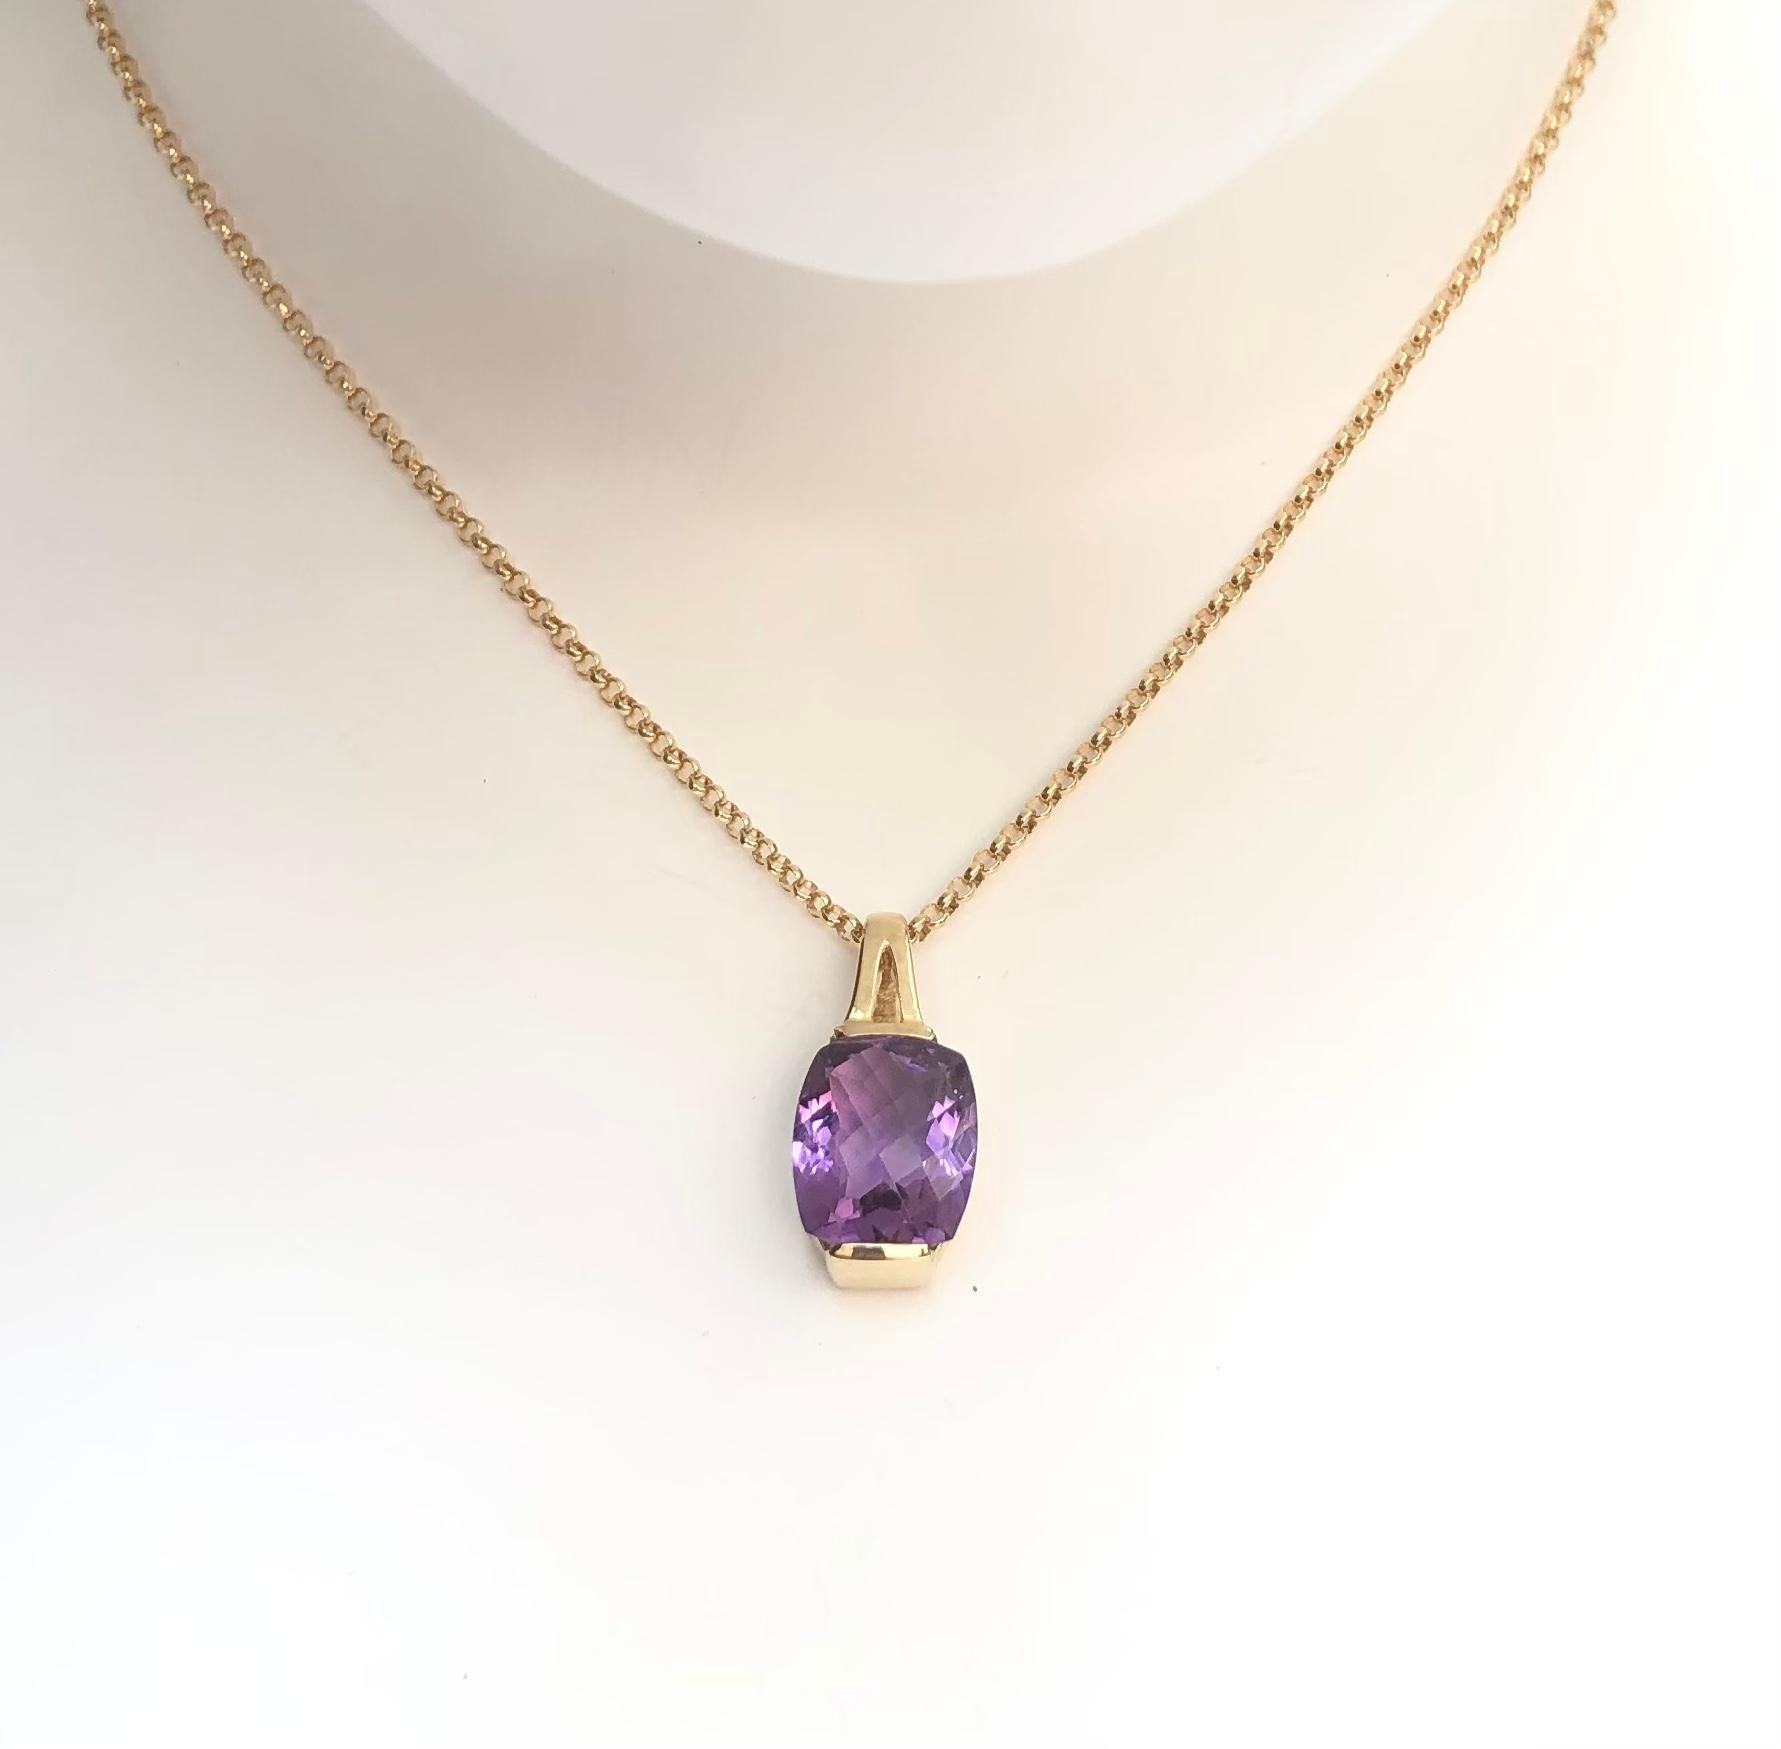 Amethyst 4.63 carats Pendant set in 18 Karat Gold Settings
(chain not included)

Width:  1.0 cm 
Length: 2.1 cm
Total Weight: 3.47 grams

